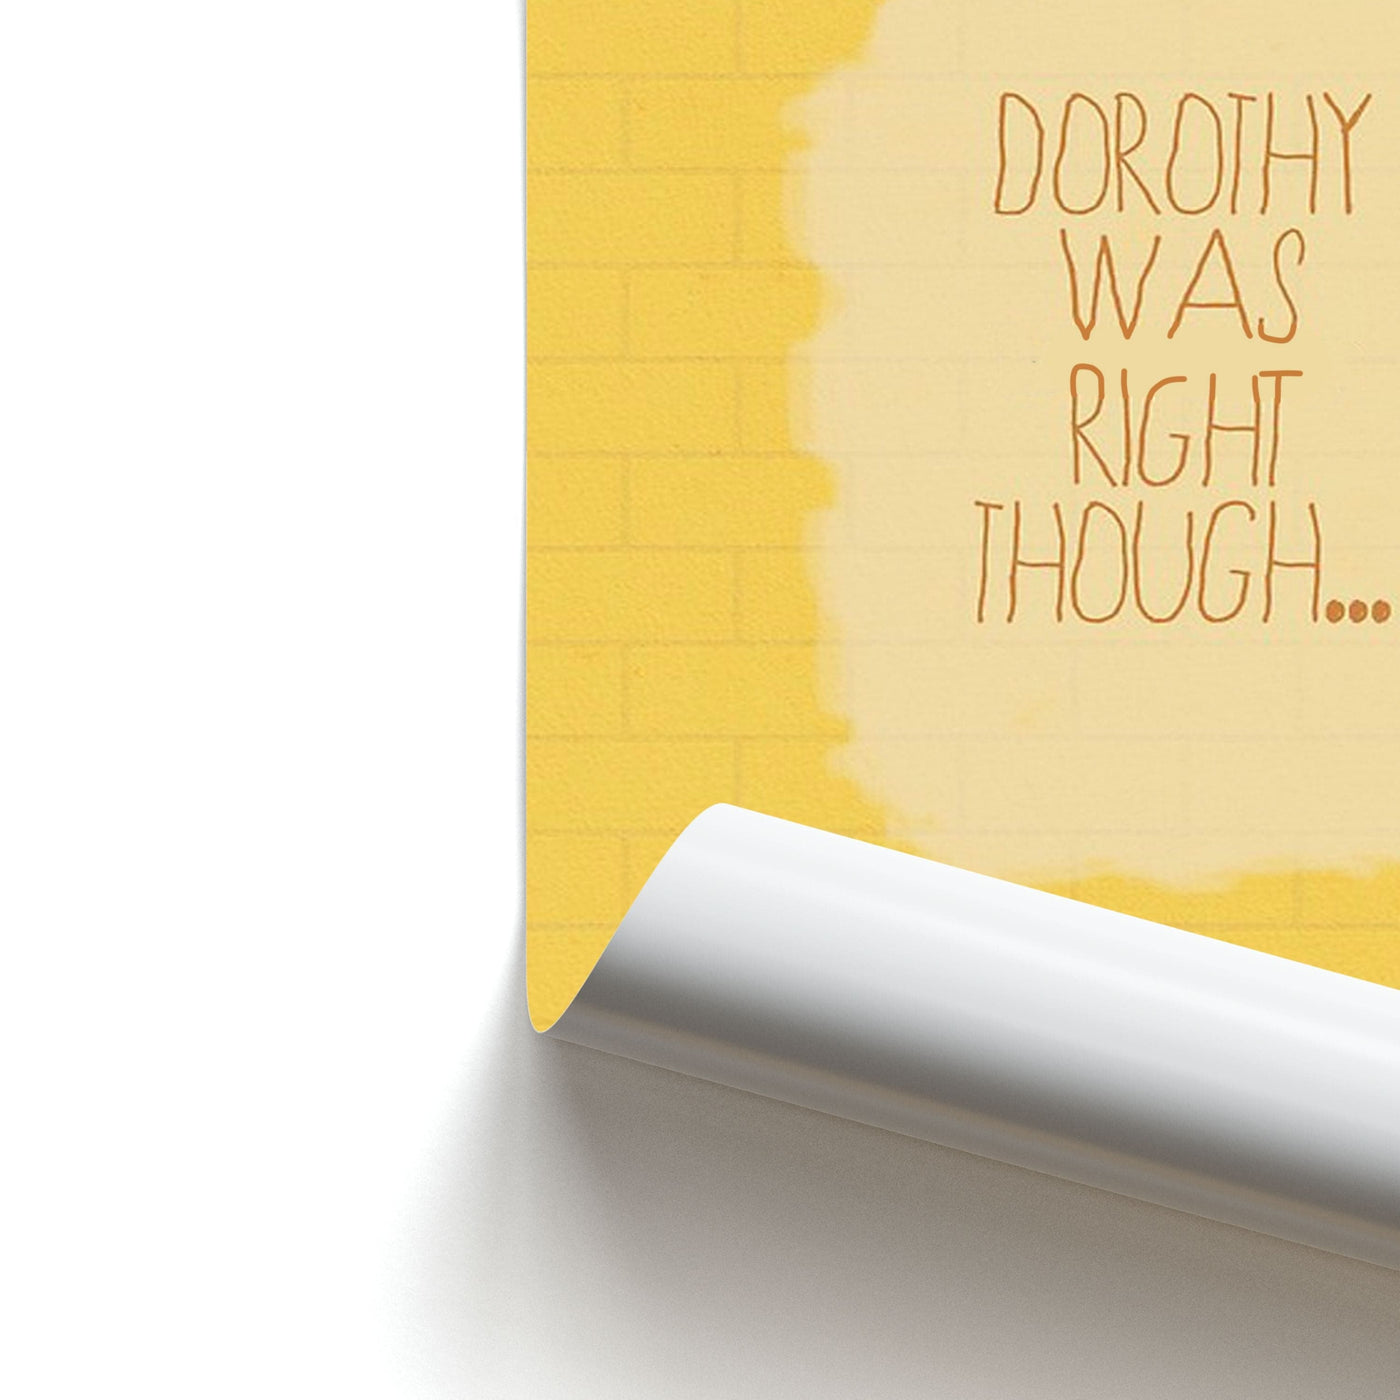 But Dorothy Was Right Though - Arctic Monkeys Poster